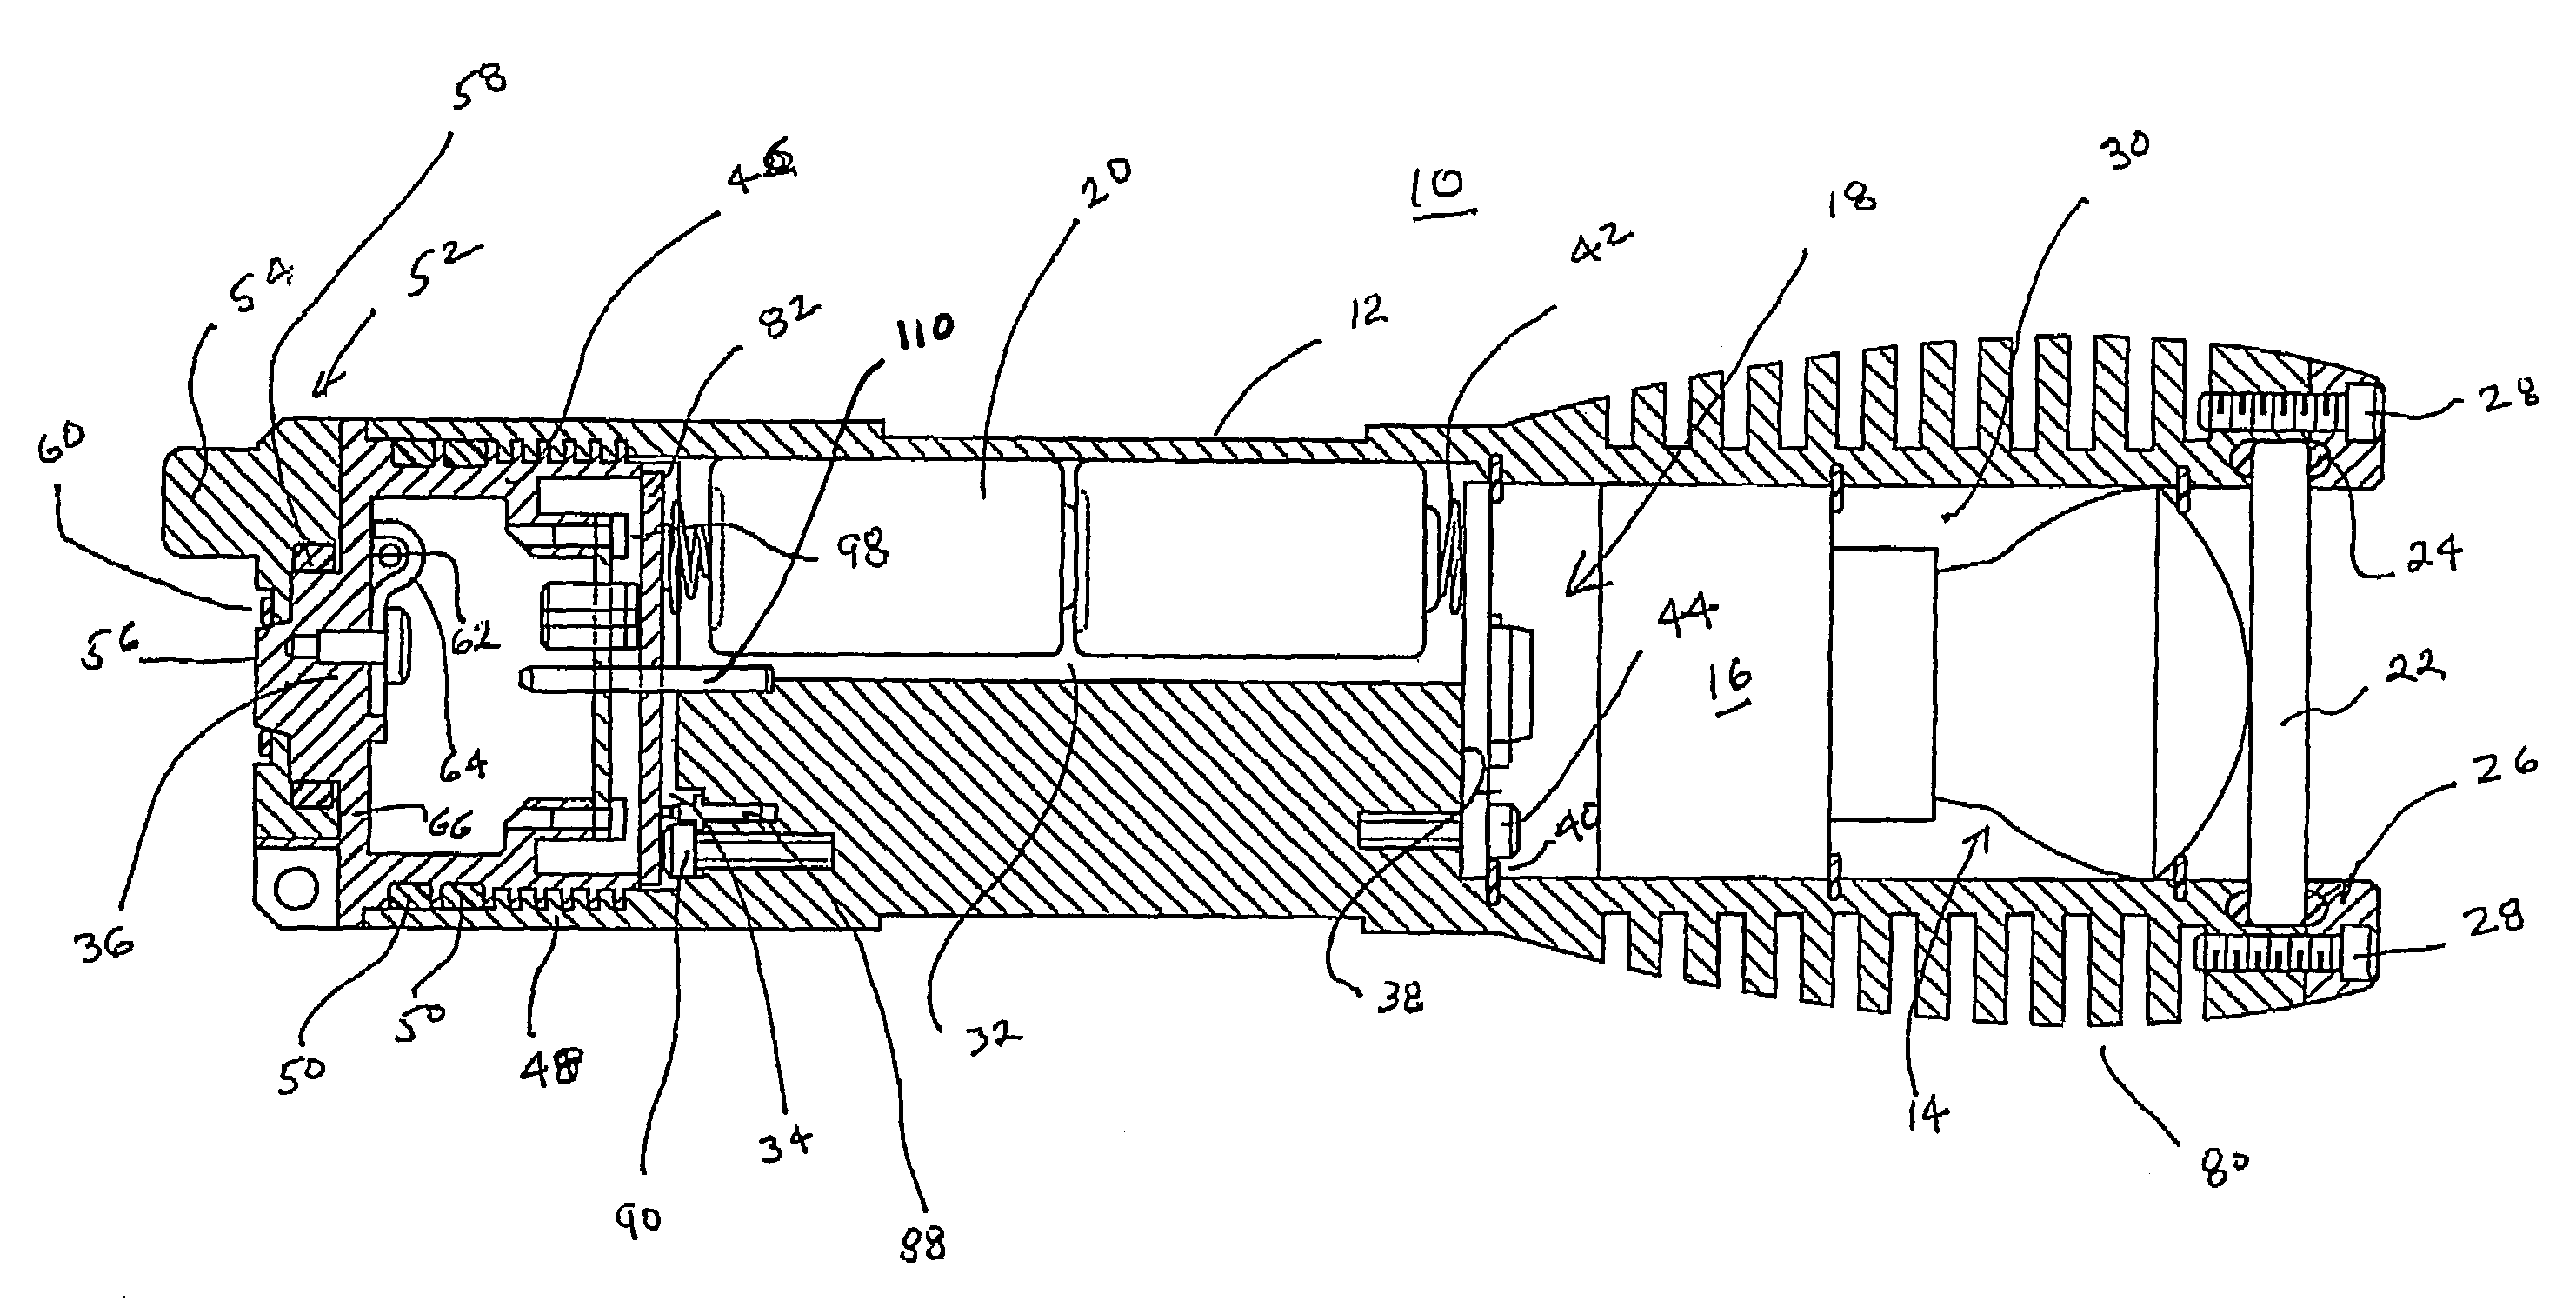 Waterproof flashlight including electronic power switch actuated by a mechanical switch